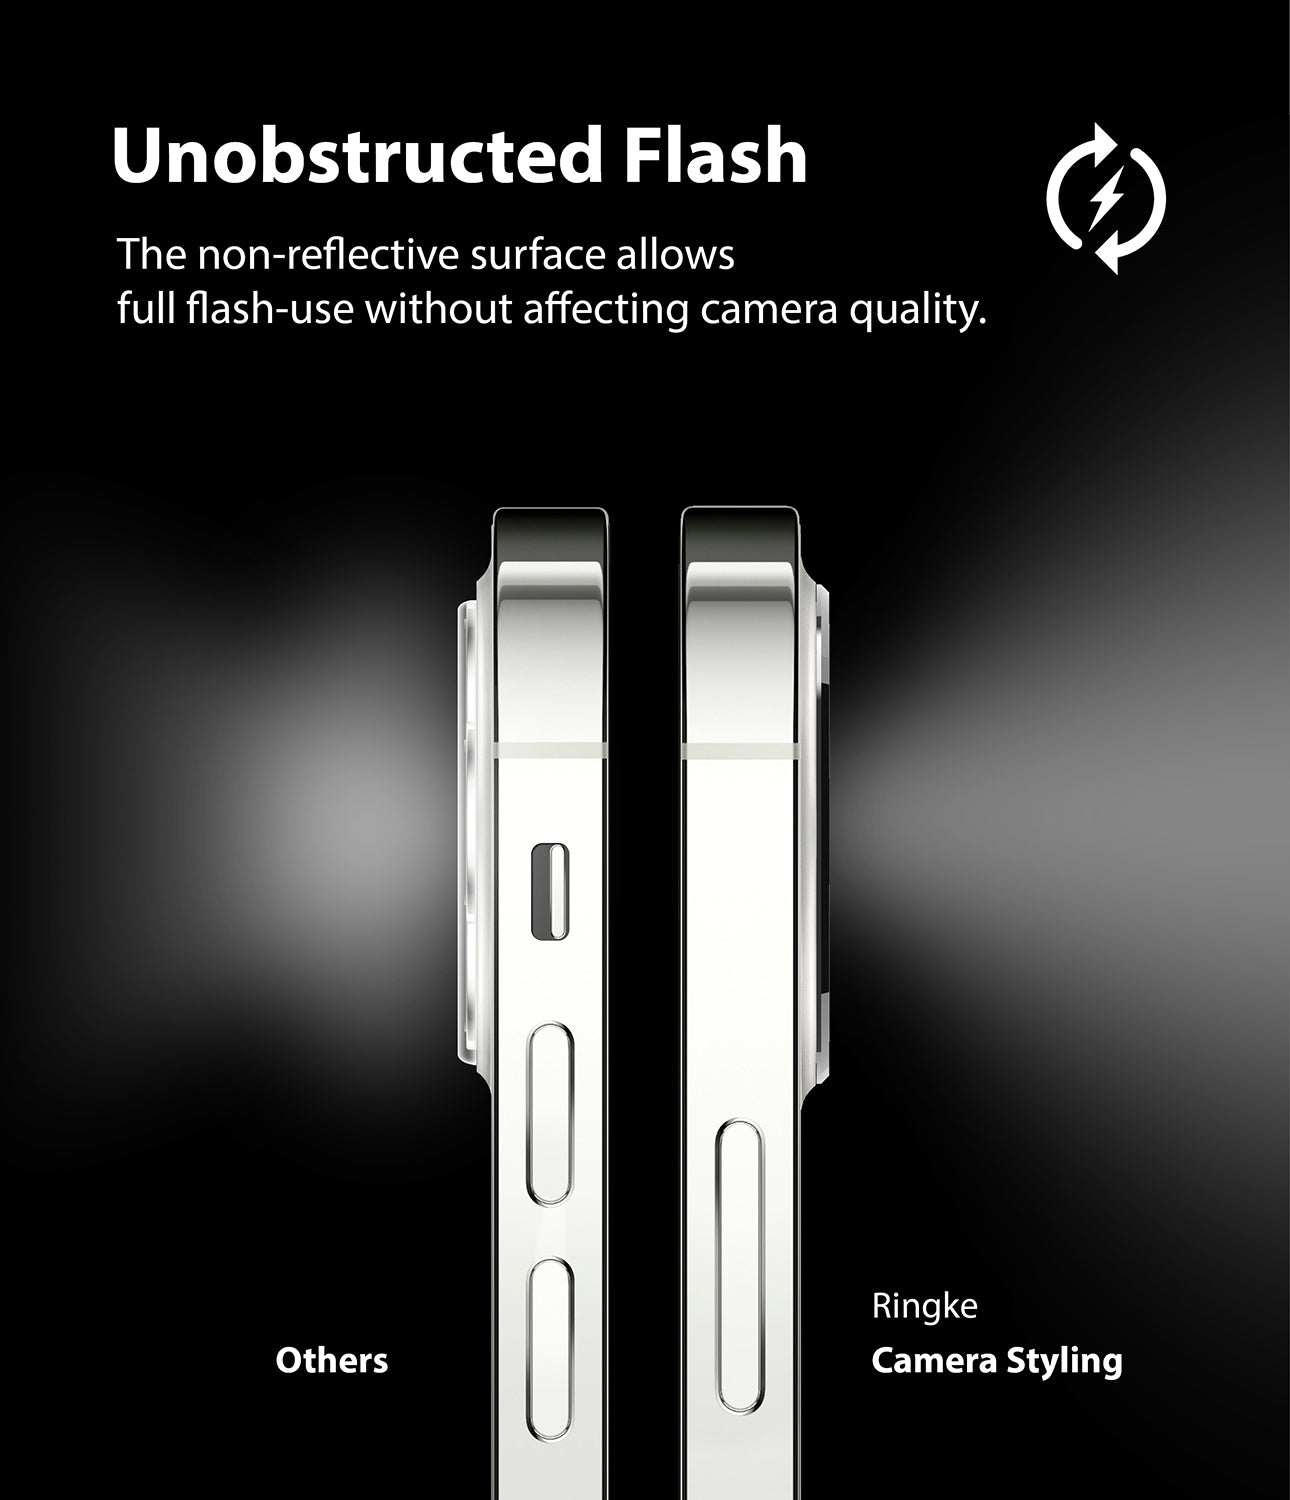 unobstructed flash - the non-reflective surface allows full flash-use without affecting camera quality